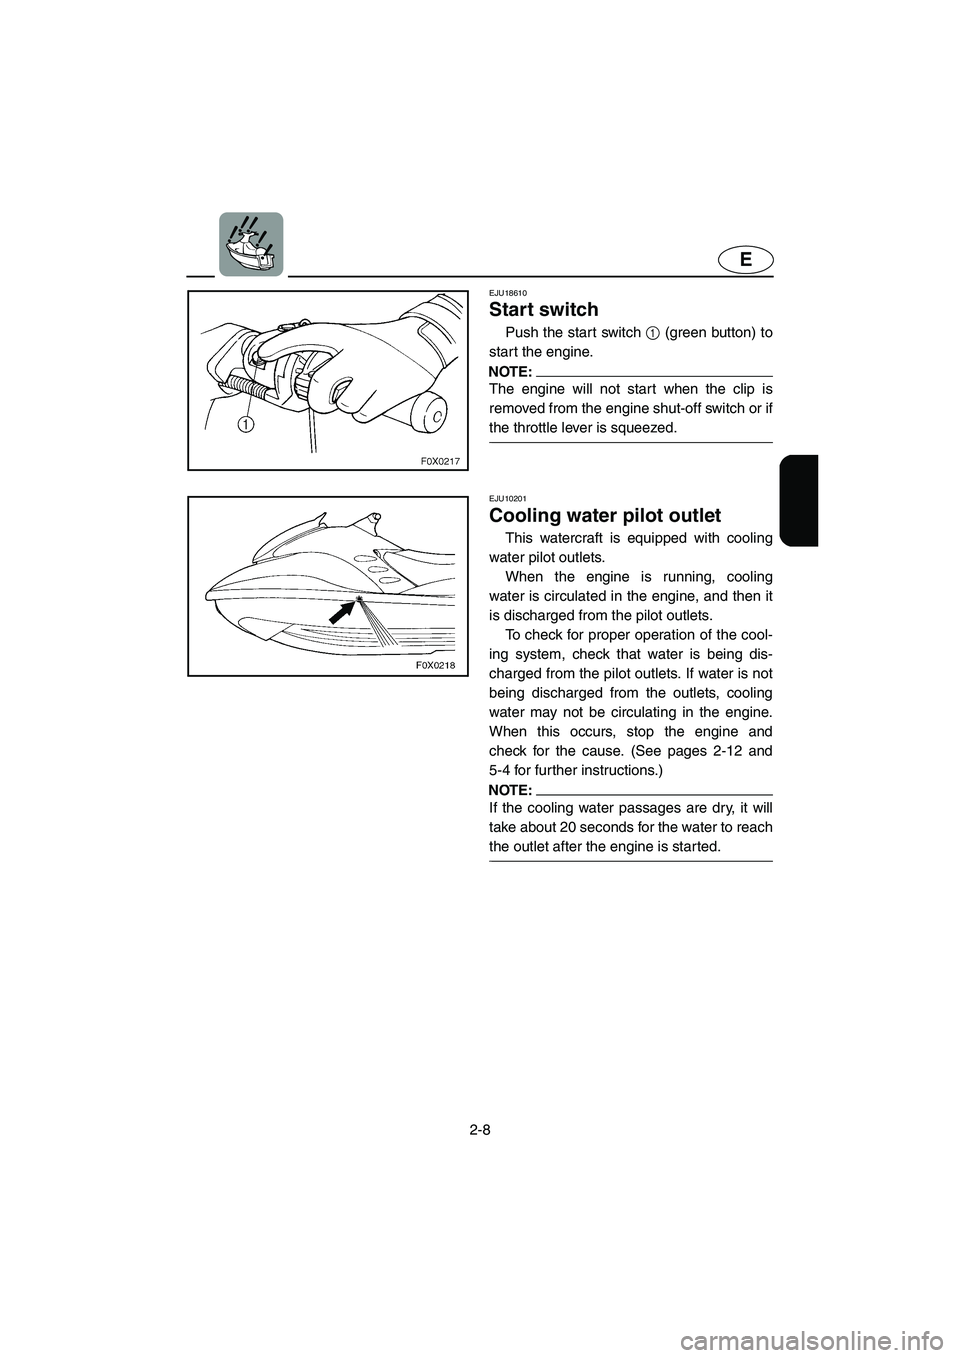 YAMAHA GP1300R 2003  Owners Manual 2-8
E
EJU18610 
Start switch 
Push the start switch 1 (green button) to
start the engine.
NOTE:@ The engine will not start when the clip is
removed from the engine shut-off switch or if
the throttle l